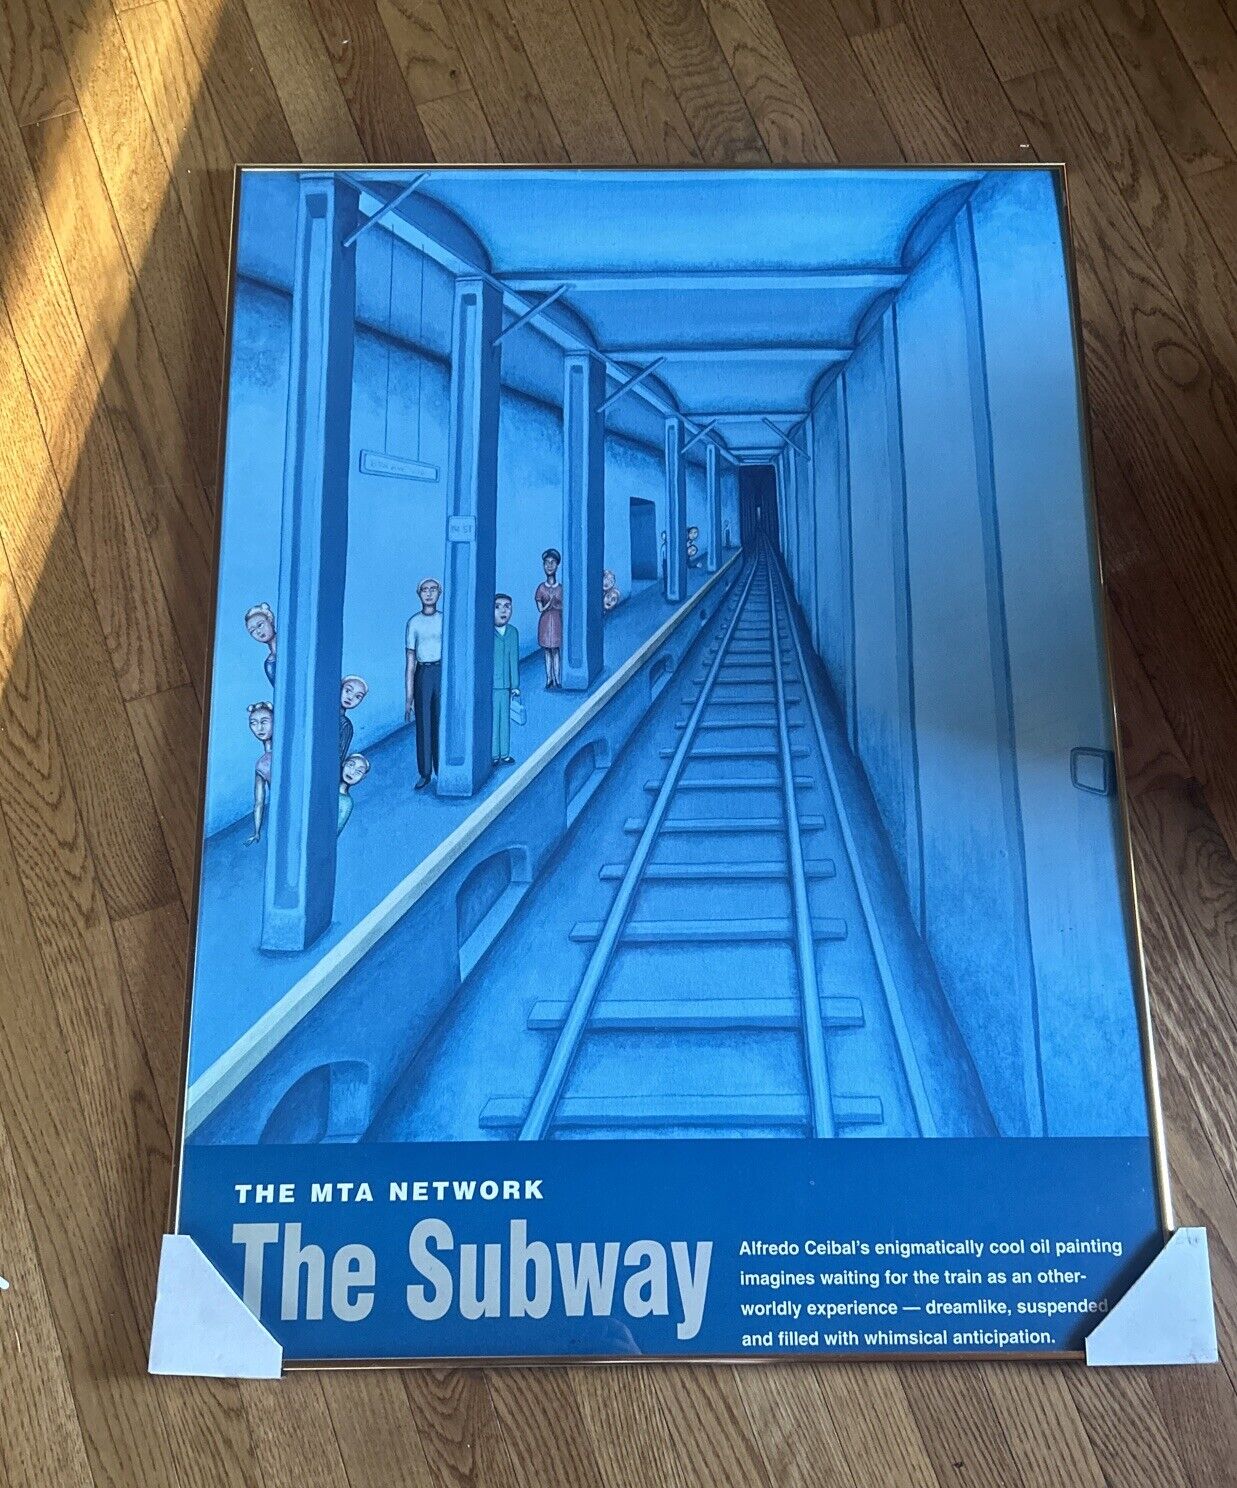 The Mta Network The Subway Alfredo Ceibal Poster WITH FRAME 1998 Vintage